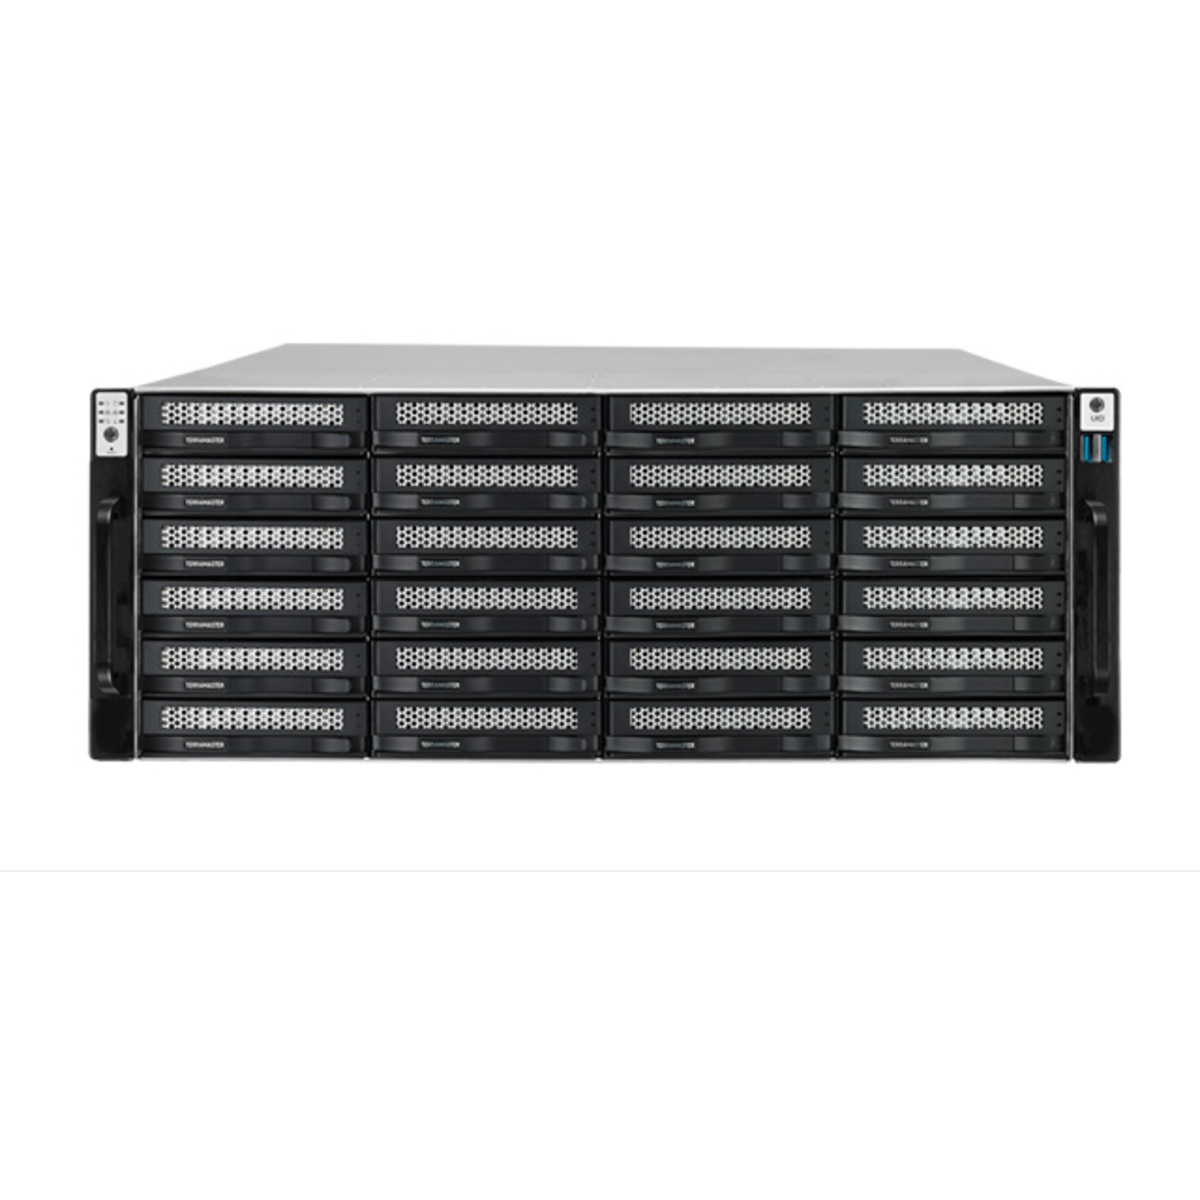 TerraMaster U24-722-2224 21tb 24-Bay RackMount Large Business / Enterprise NAS - Network Attached Storage Device 21x1tb Western Digital Red SA500 WDS100T1R0A 2.5 560/530MB/s SATA 6Gb/s SSD NAS Class Drives Installed - Burn-In Tested U24-722-2224